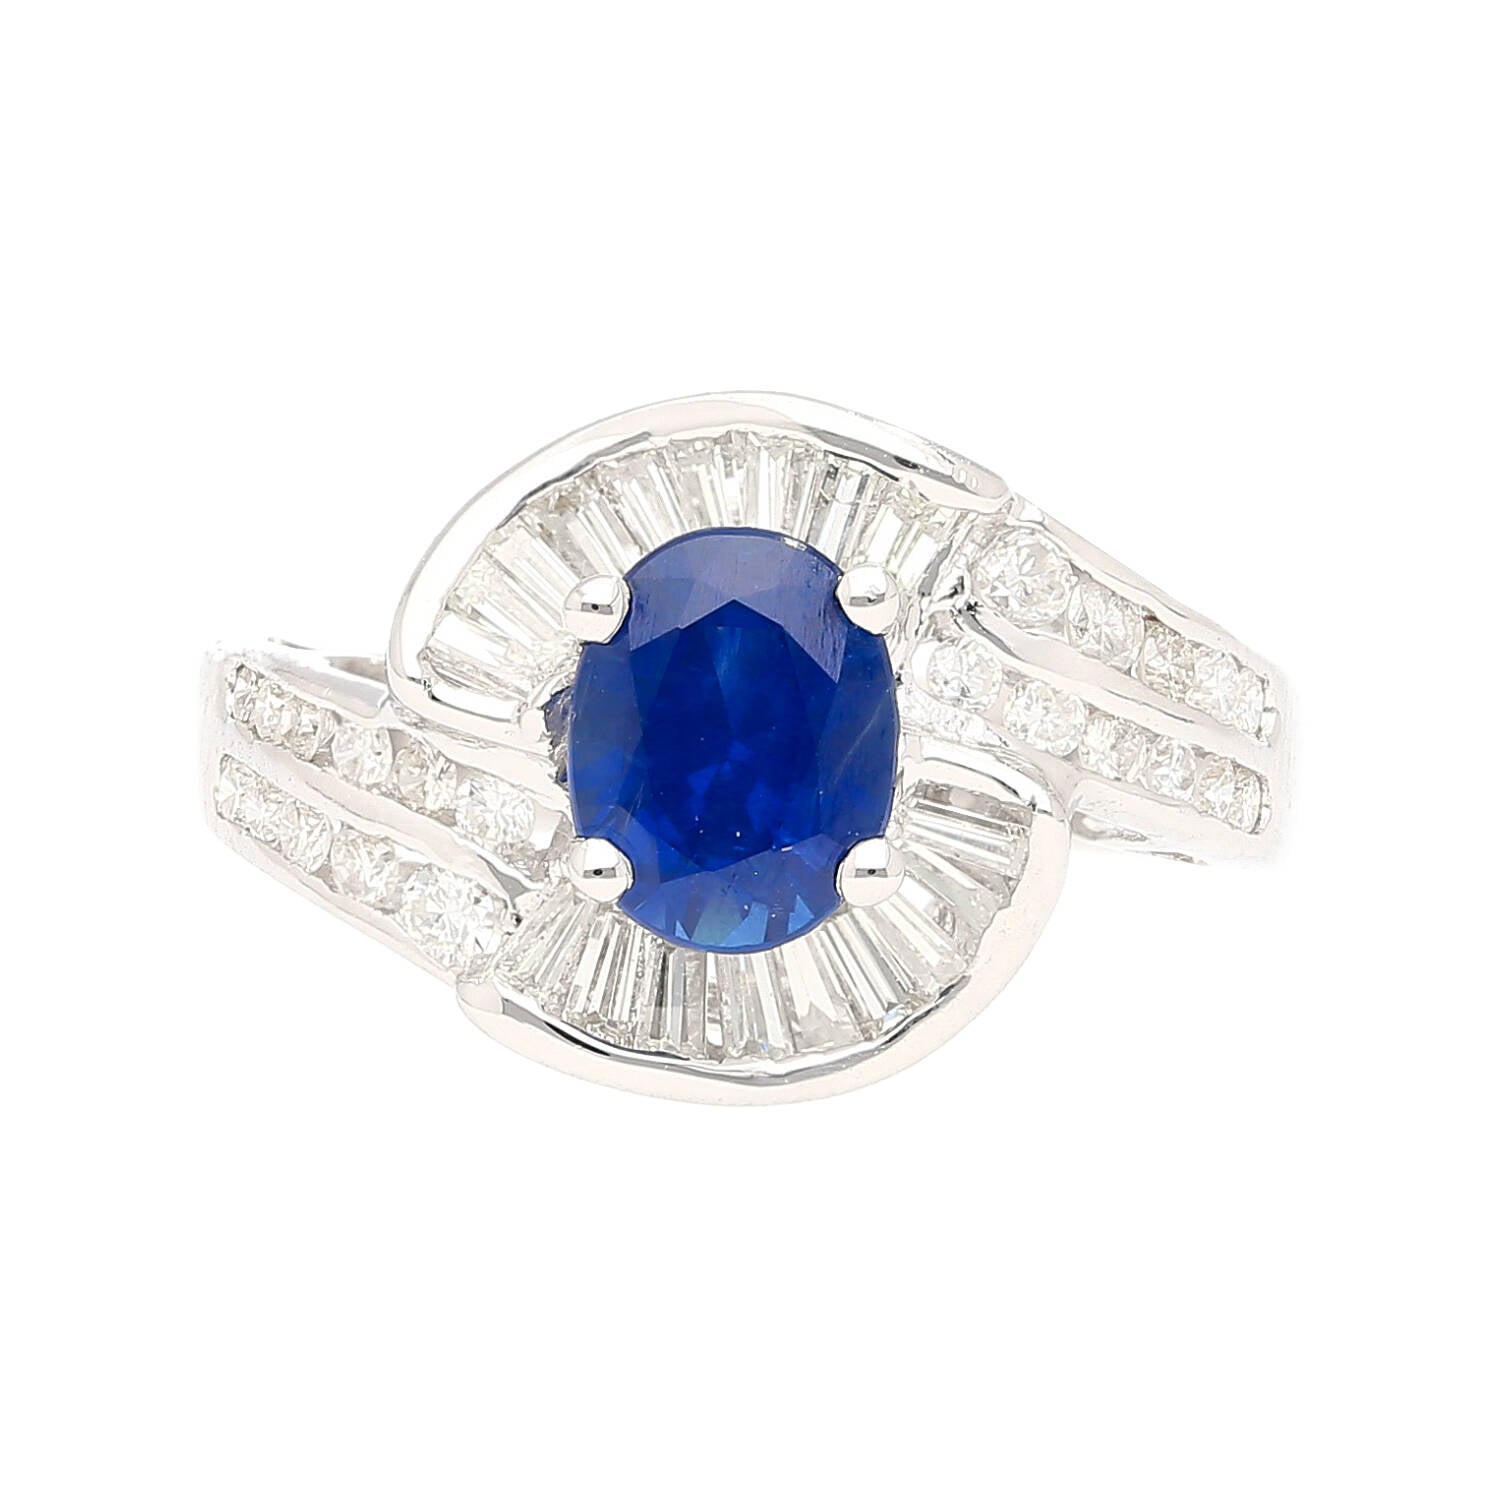 Natural-1_14-Carat-Oval-Cut-Blue-Sapphire-with-Round-Baguette-Cut-Diamonds-in-a-Swirled-18K-White-Gold-Ring-Setting-Rings.jpg